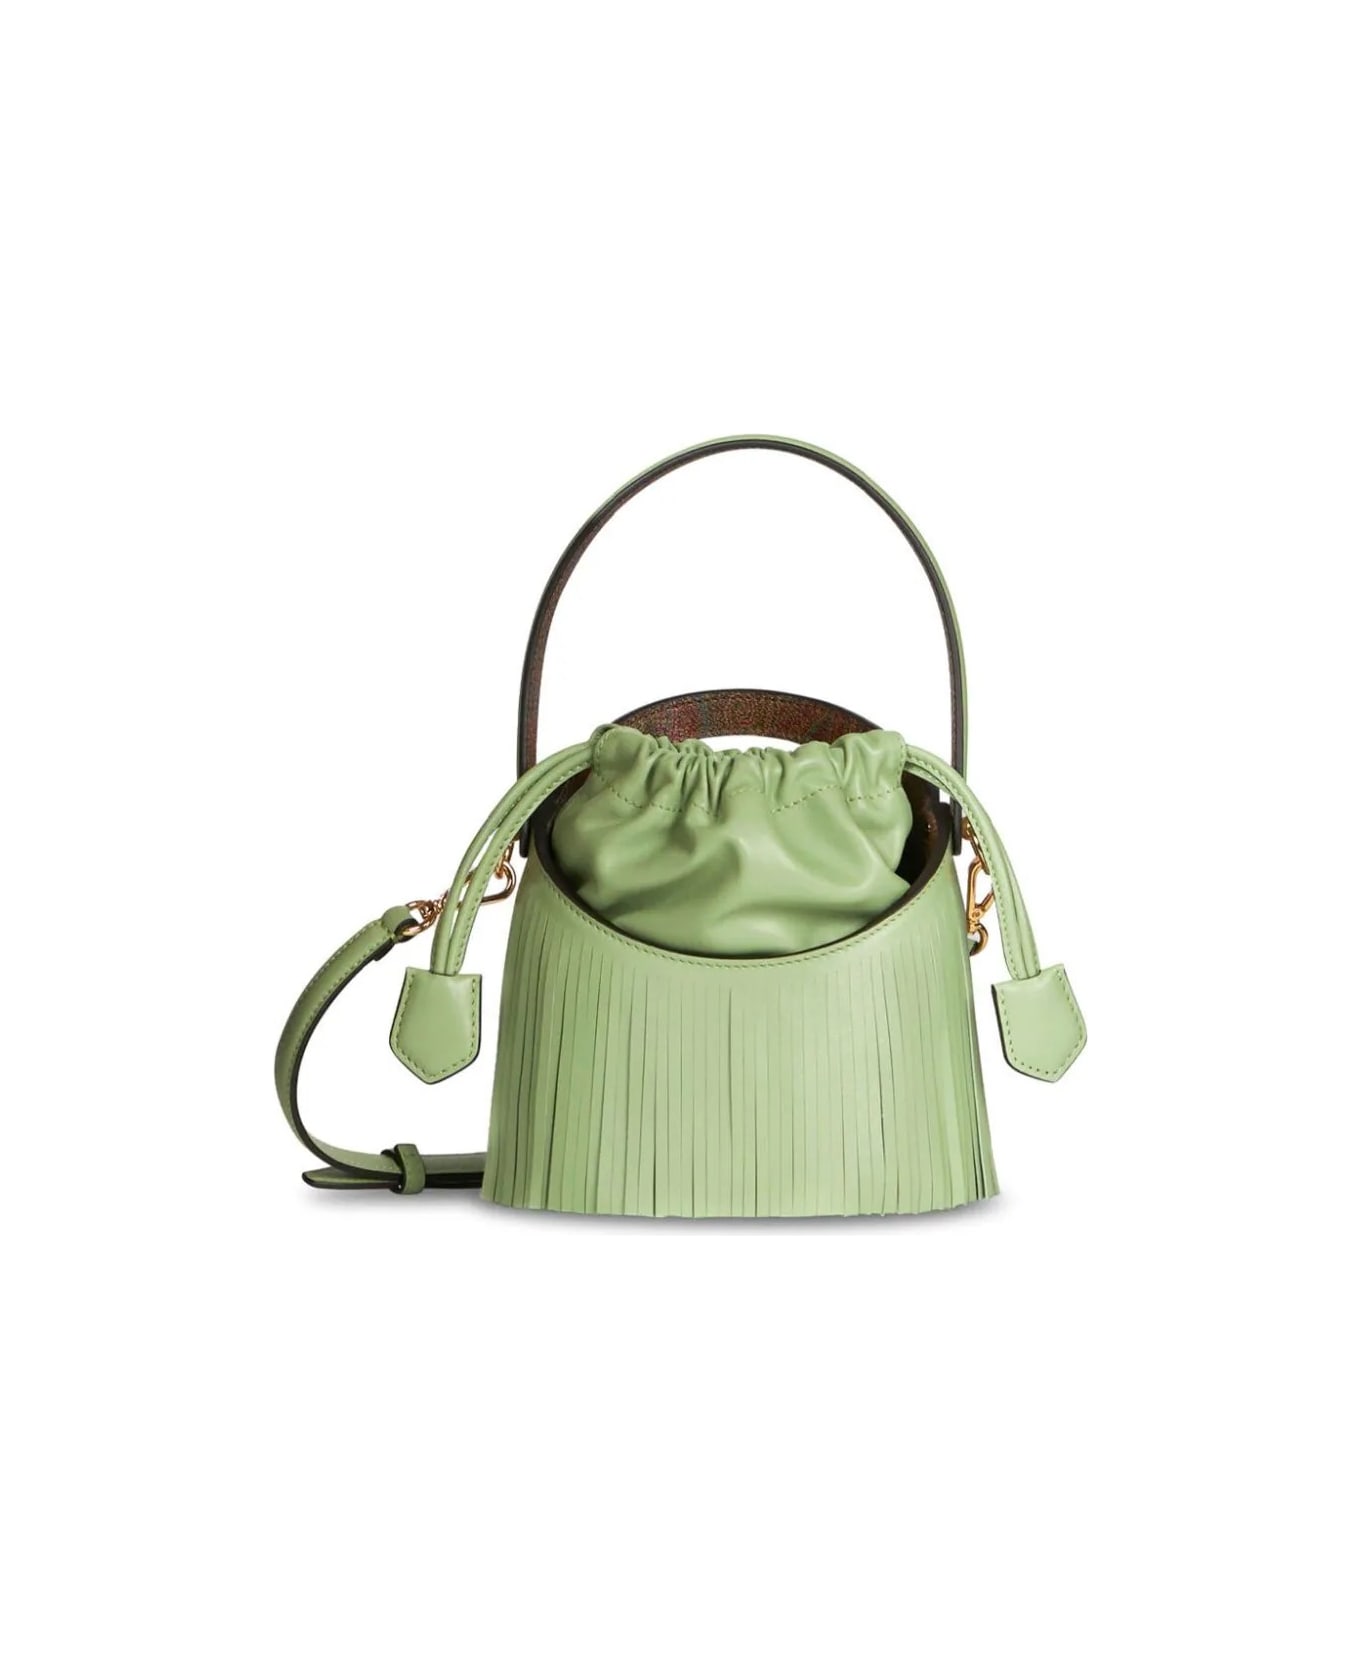 Etro Green Saturno Mini Bag With Fringes - Green トートバッグ